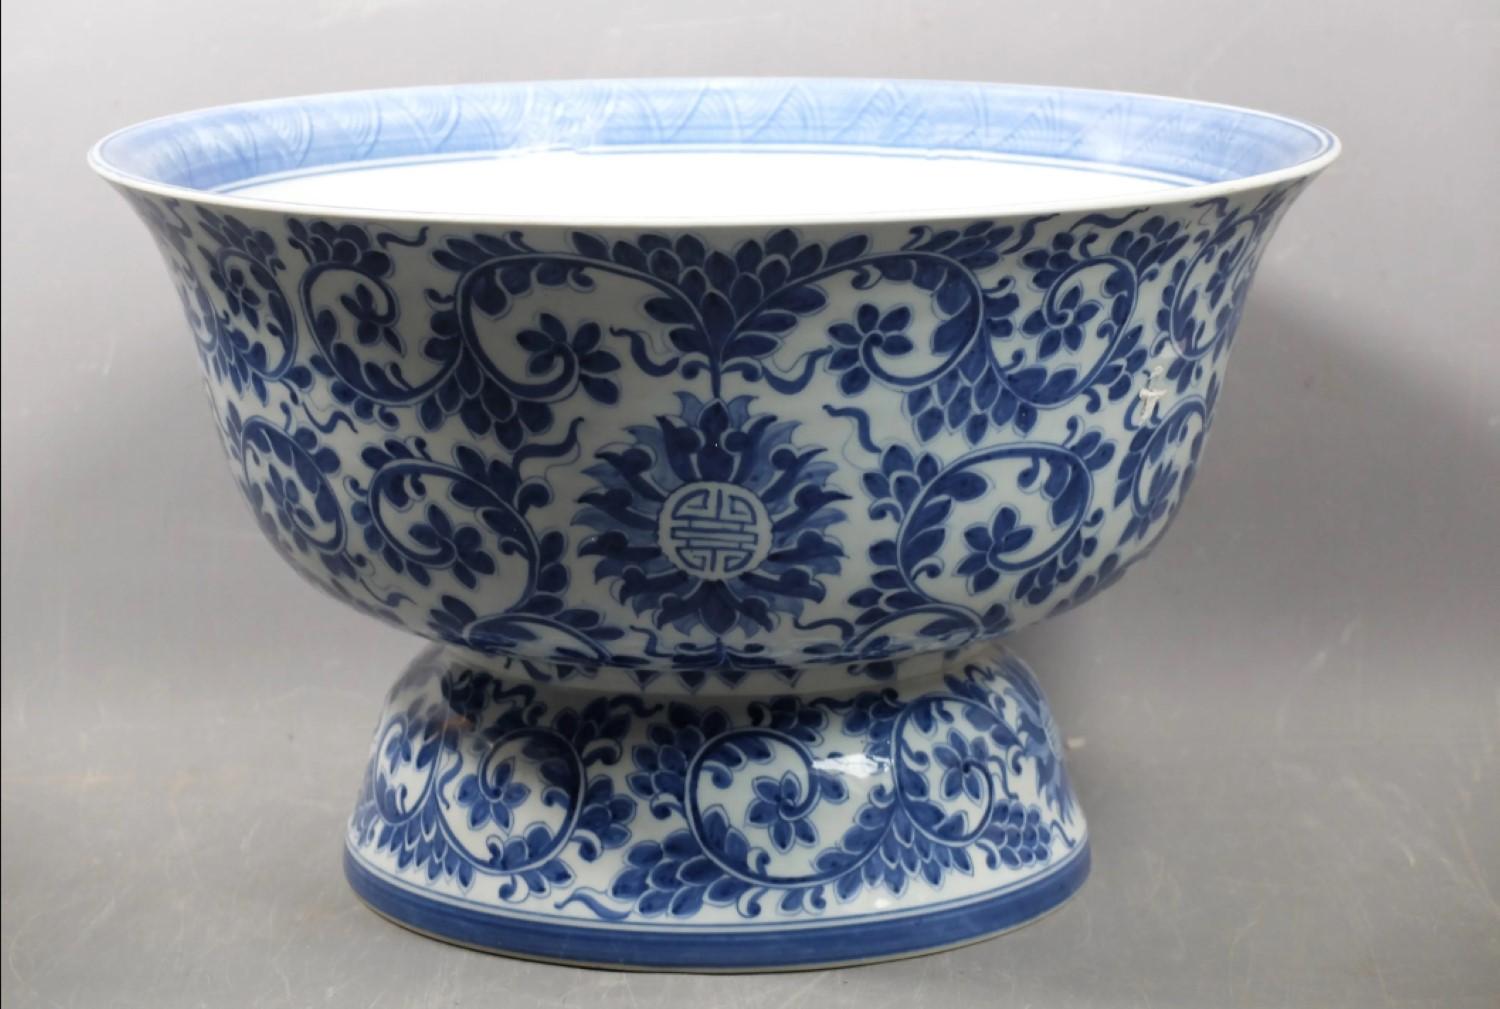 Very beautiful large white-blue porcelain basin or fruit bowl or cup. The large white bowl is decorated with a blue floral-themed composition, including foliage, lotus flowers and magnolias and an Asian sign. The belly flares towards the edge.
The